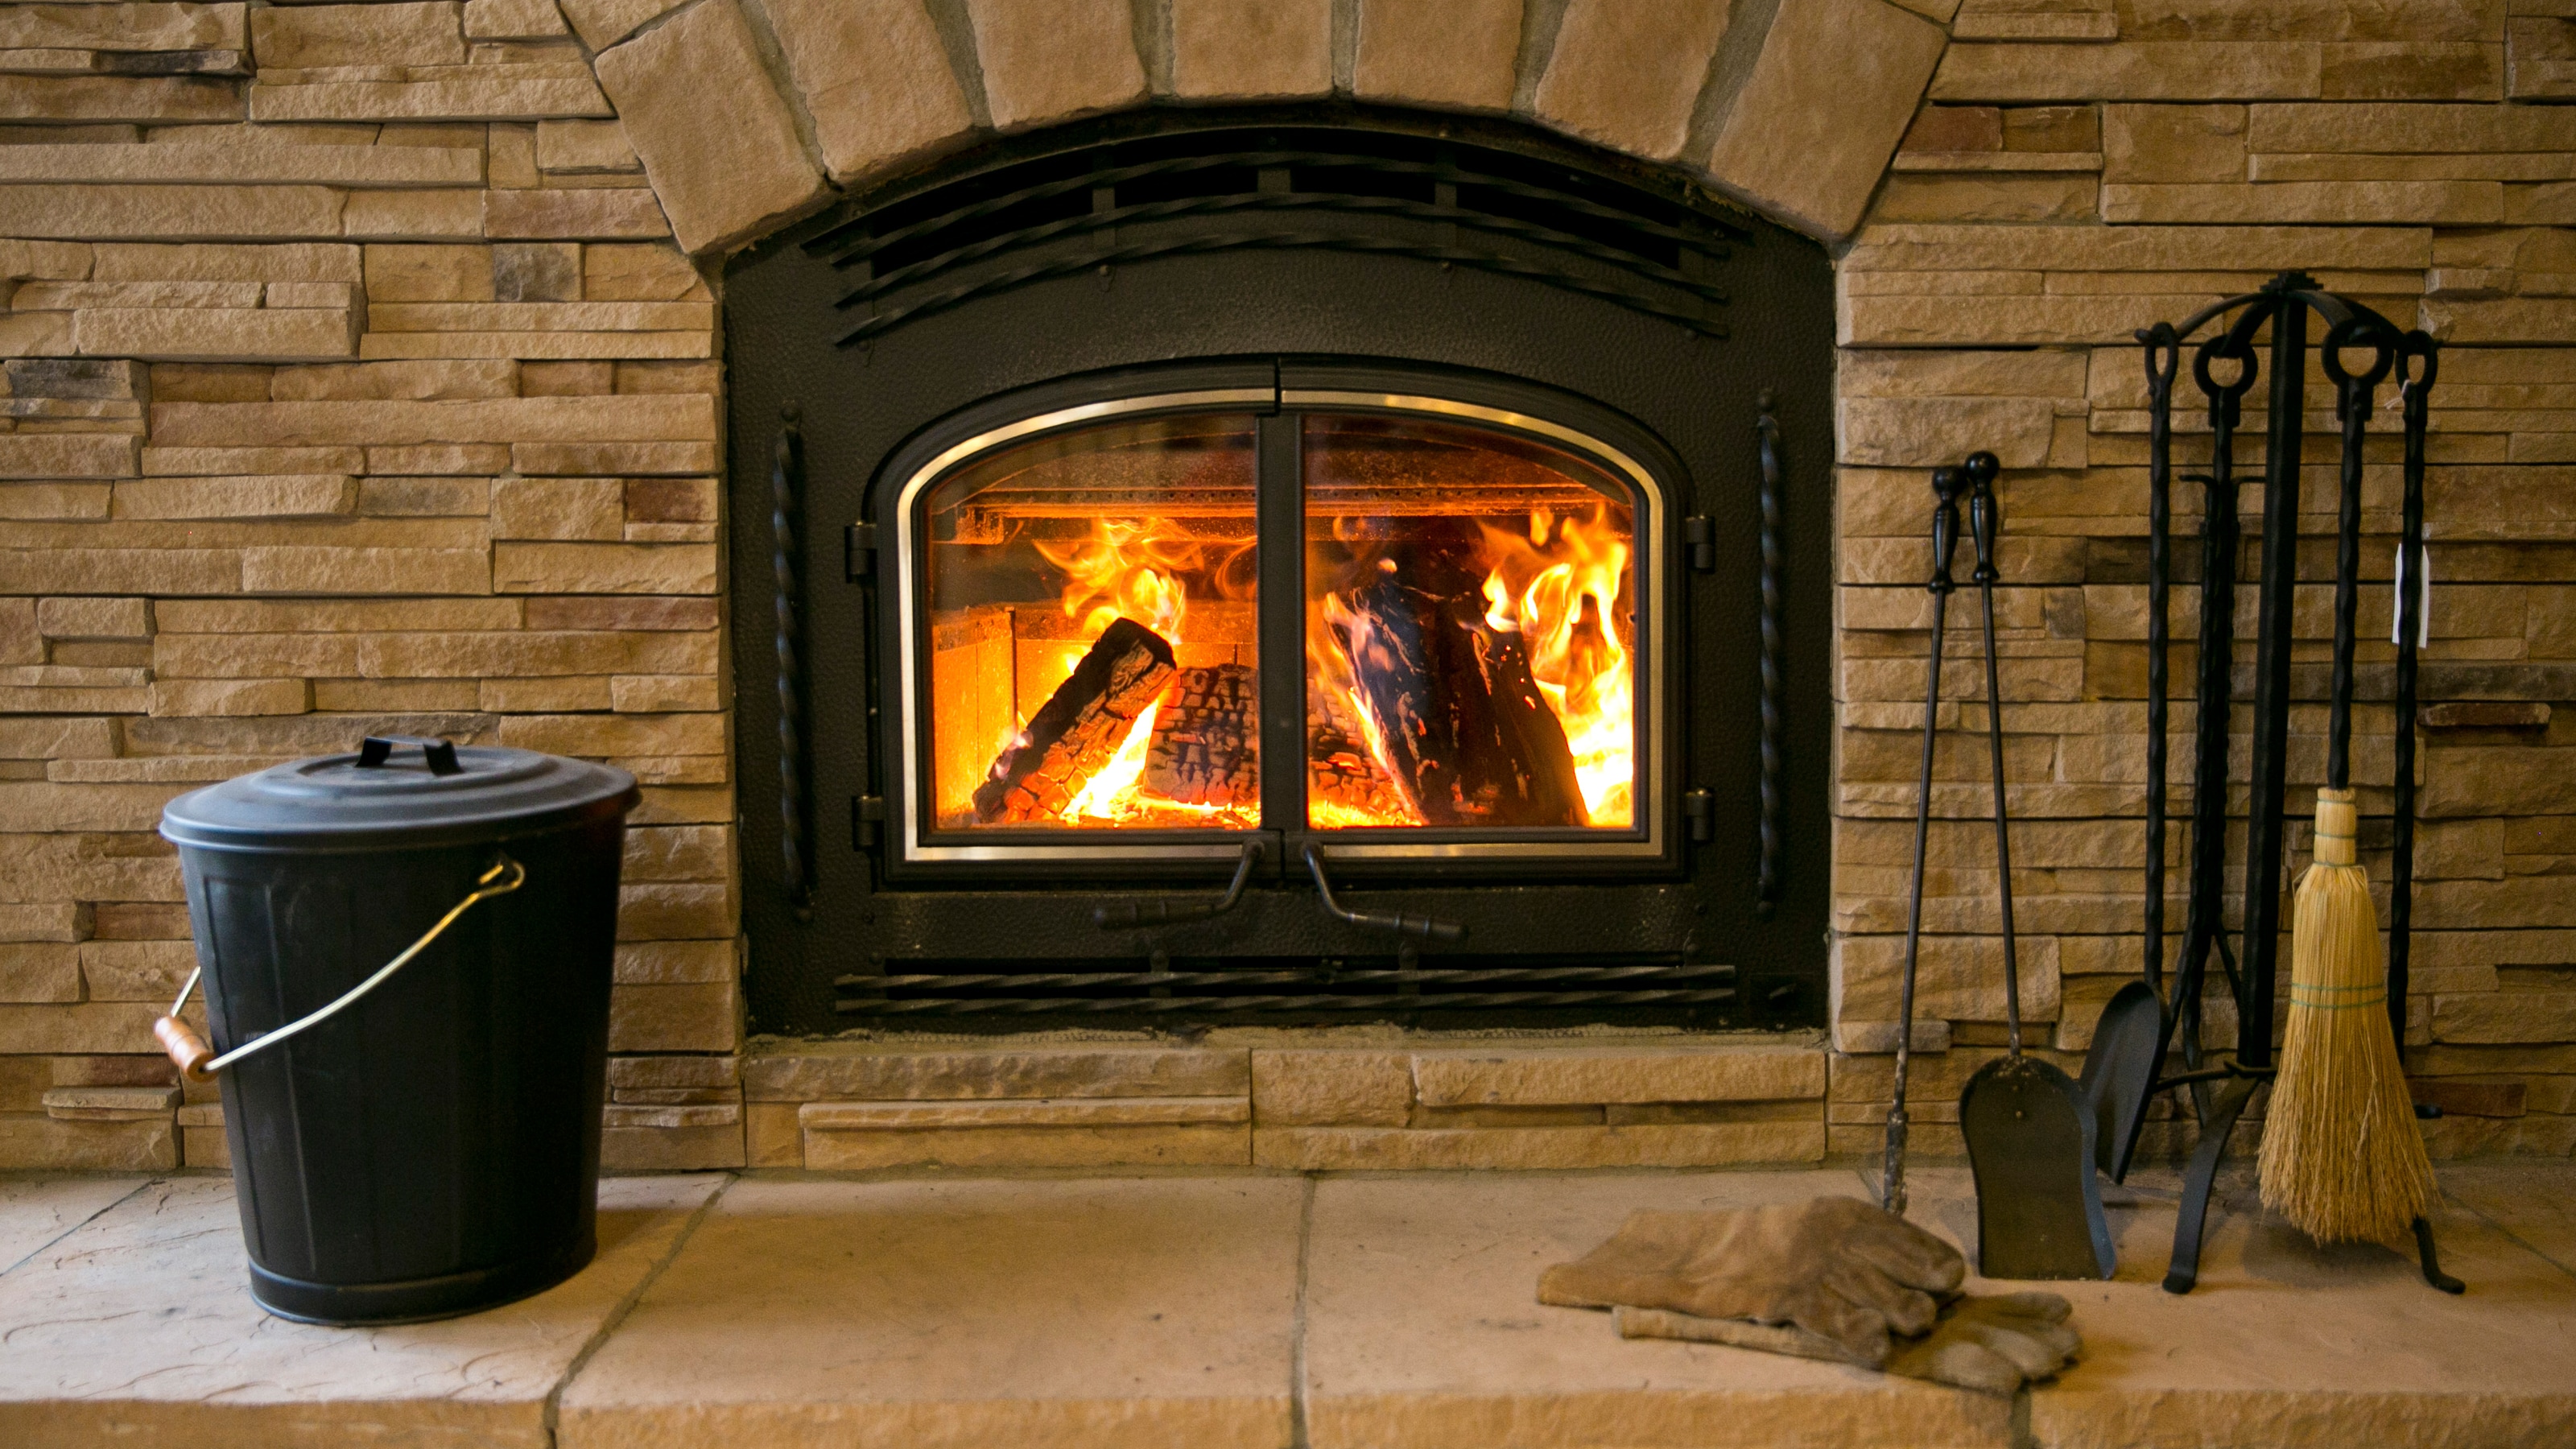 Corner Natural Gas Fireplace Ventless New How to Convert A Gas Fireplace to Wood Burning